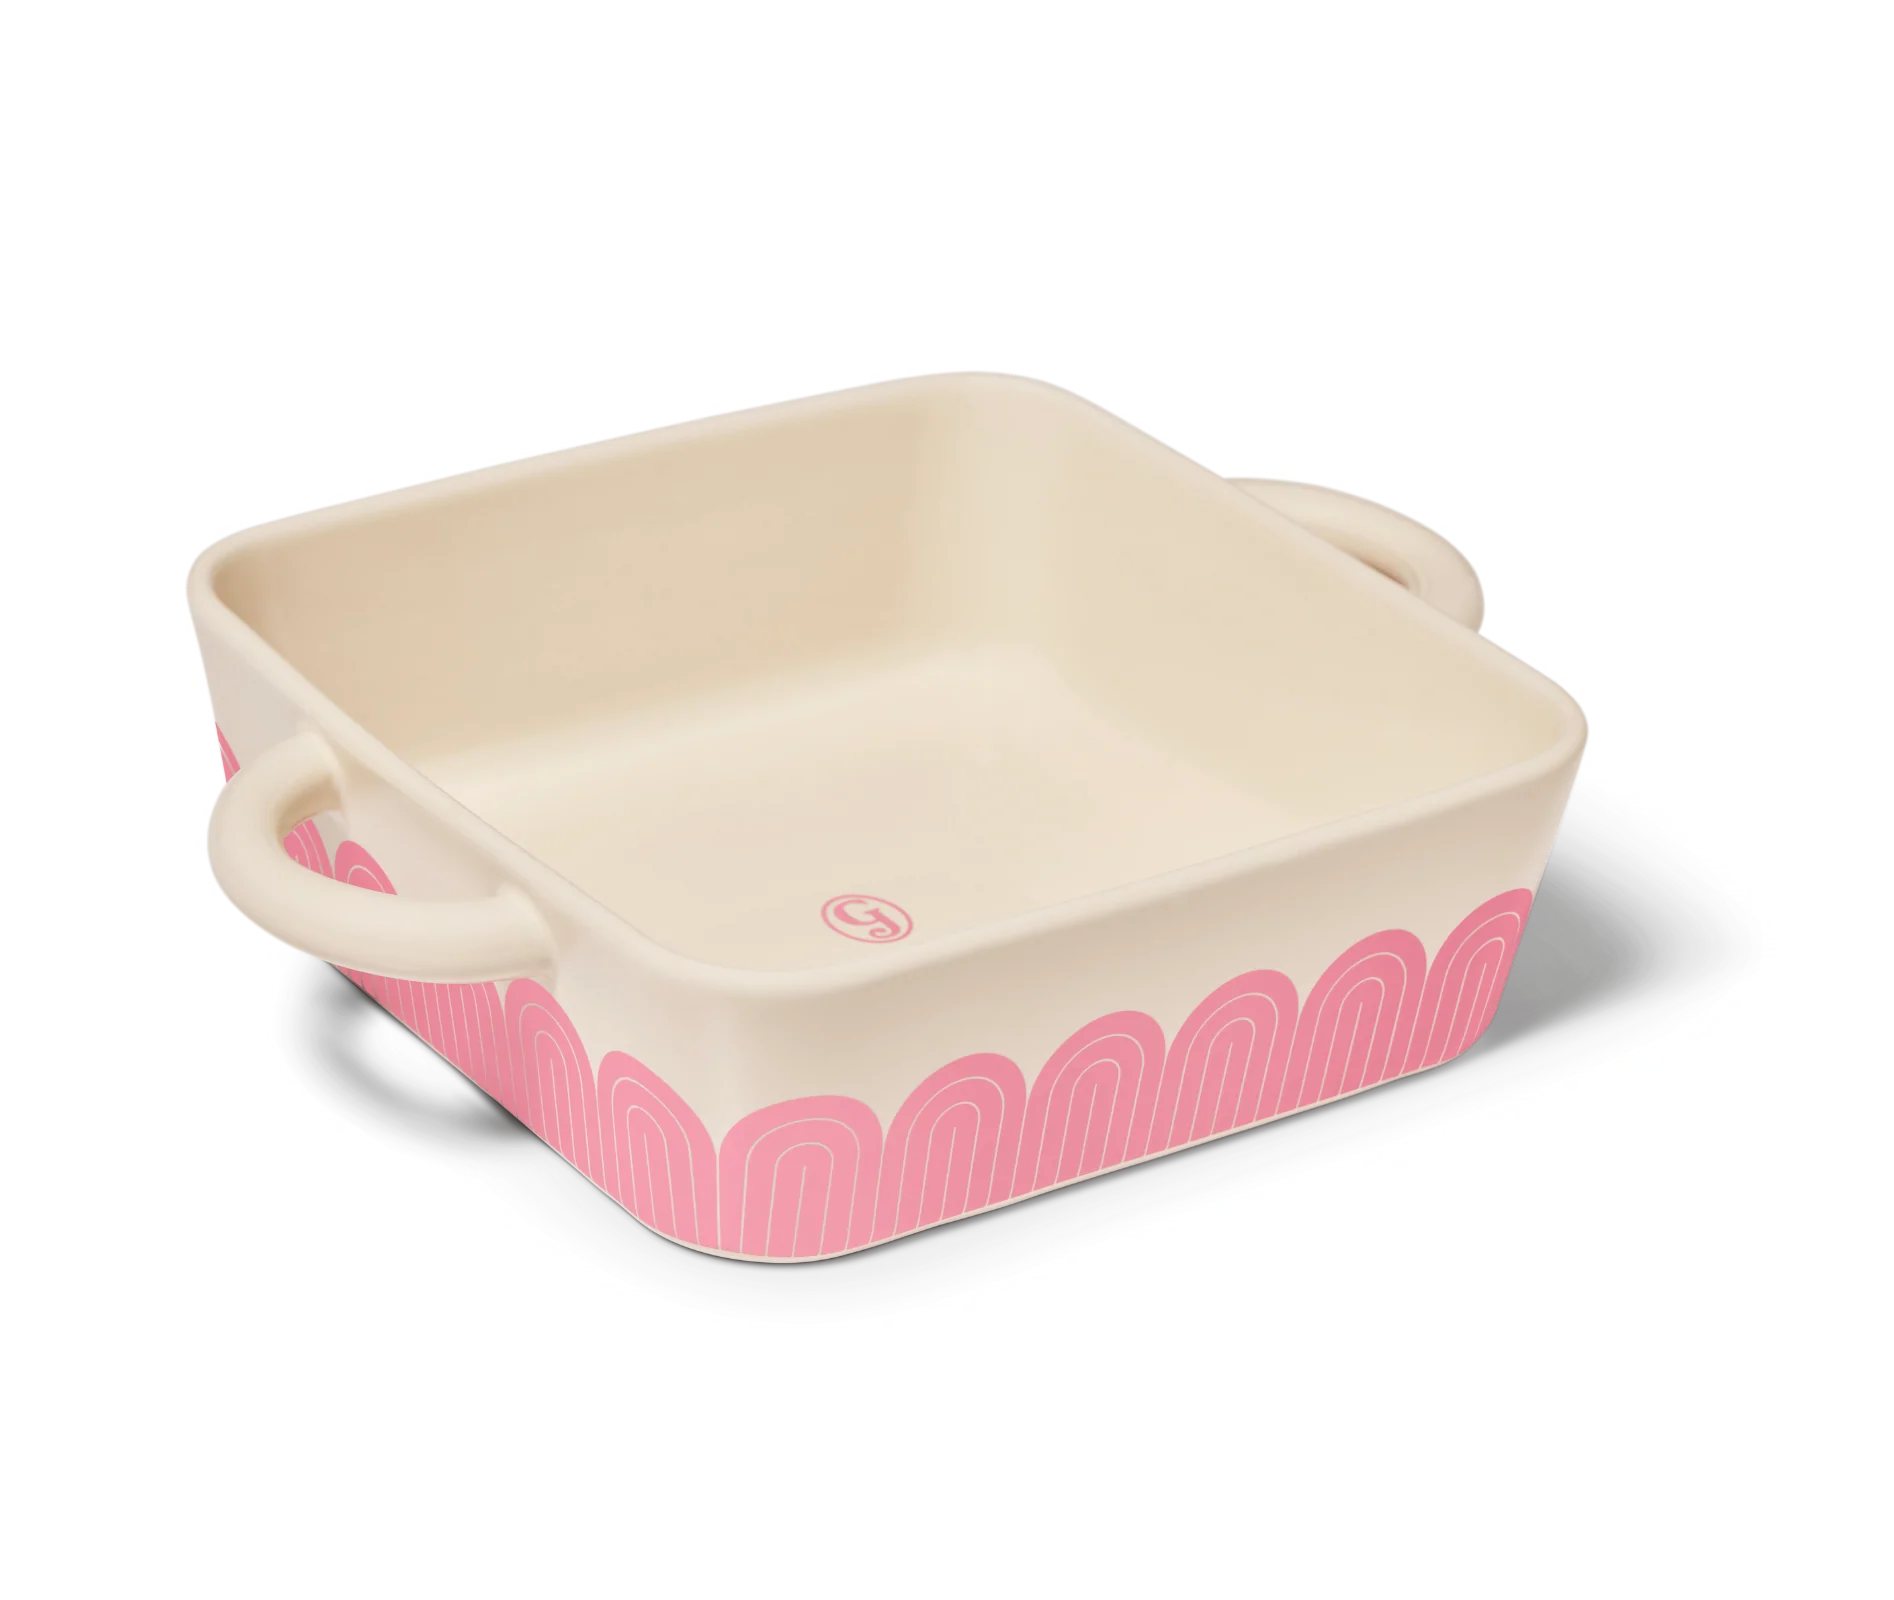 little hottie baking dish in pink on a white background